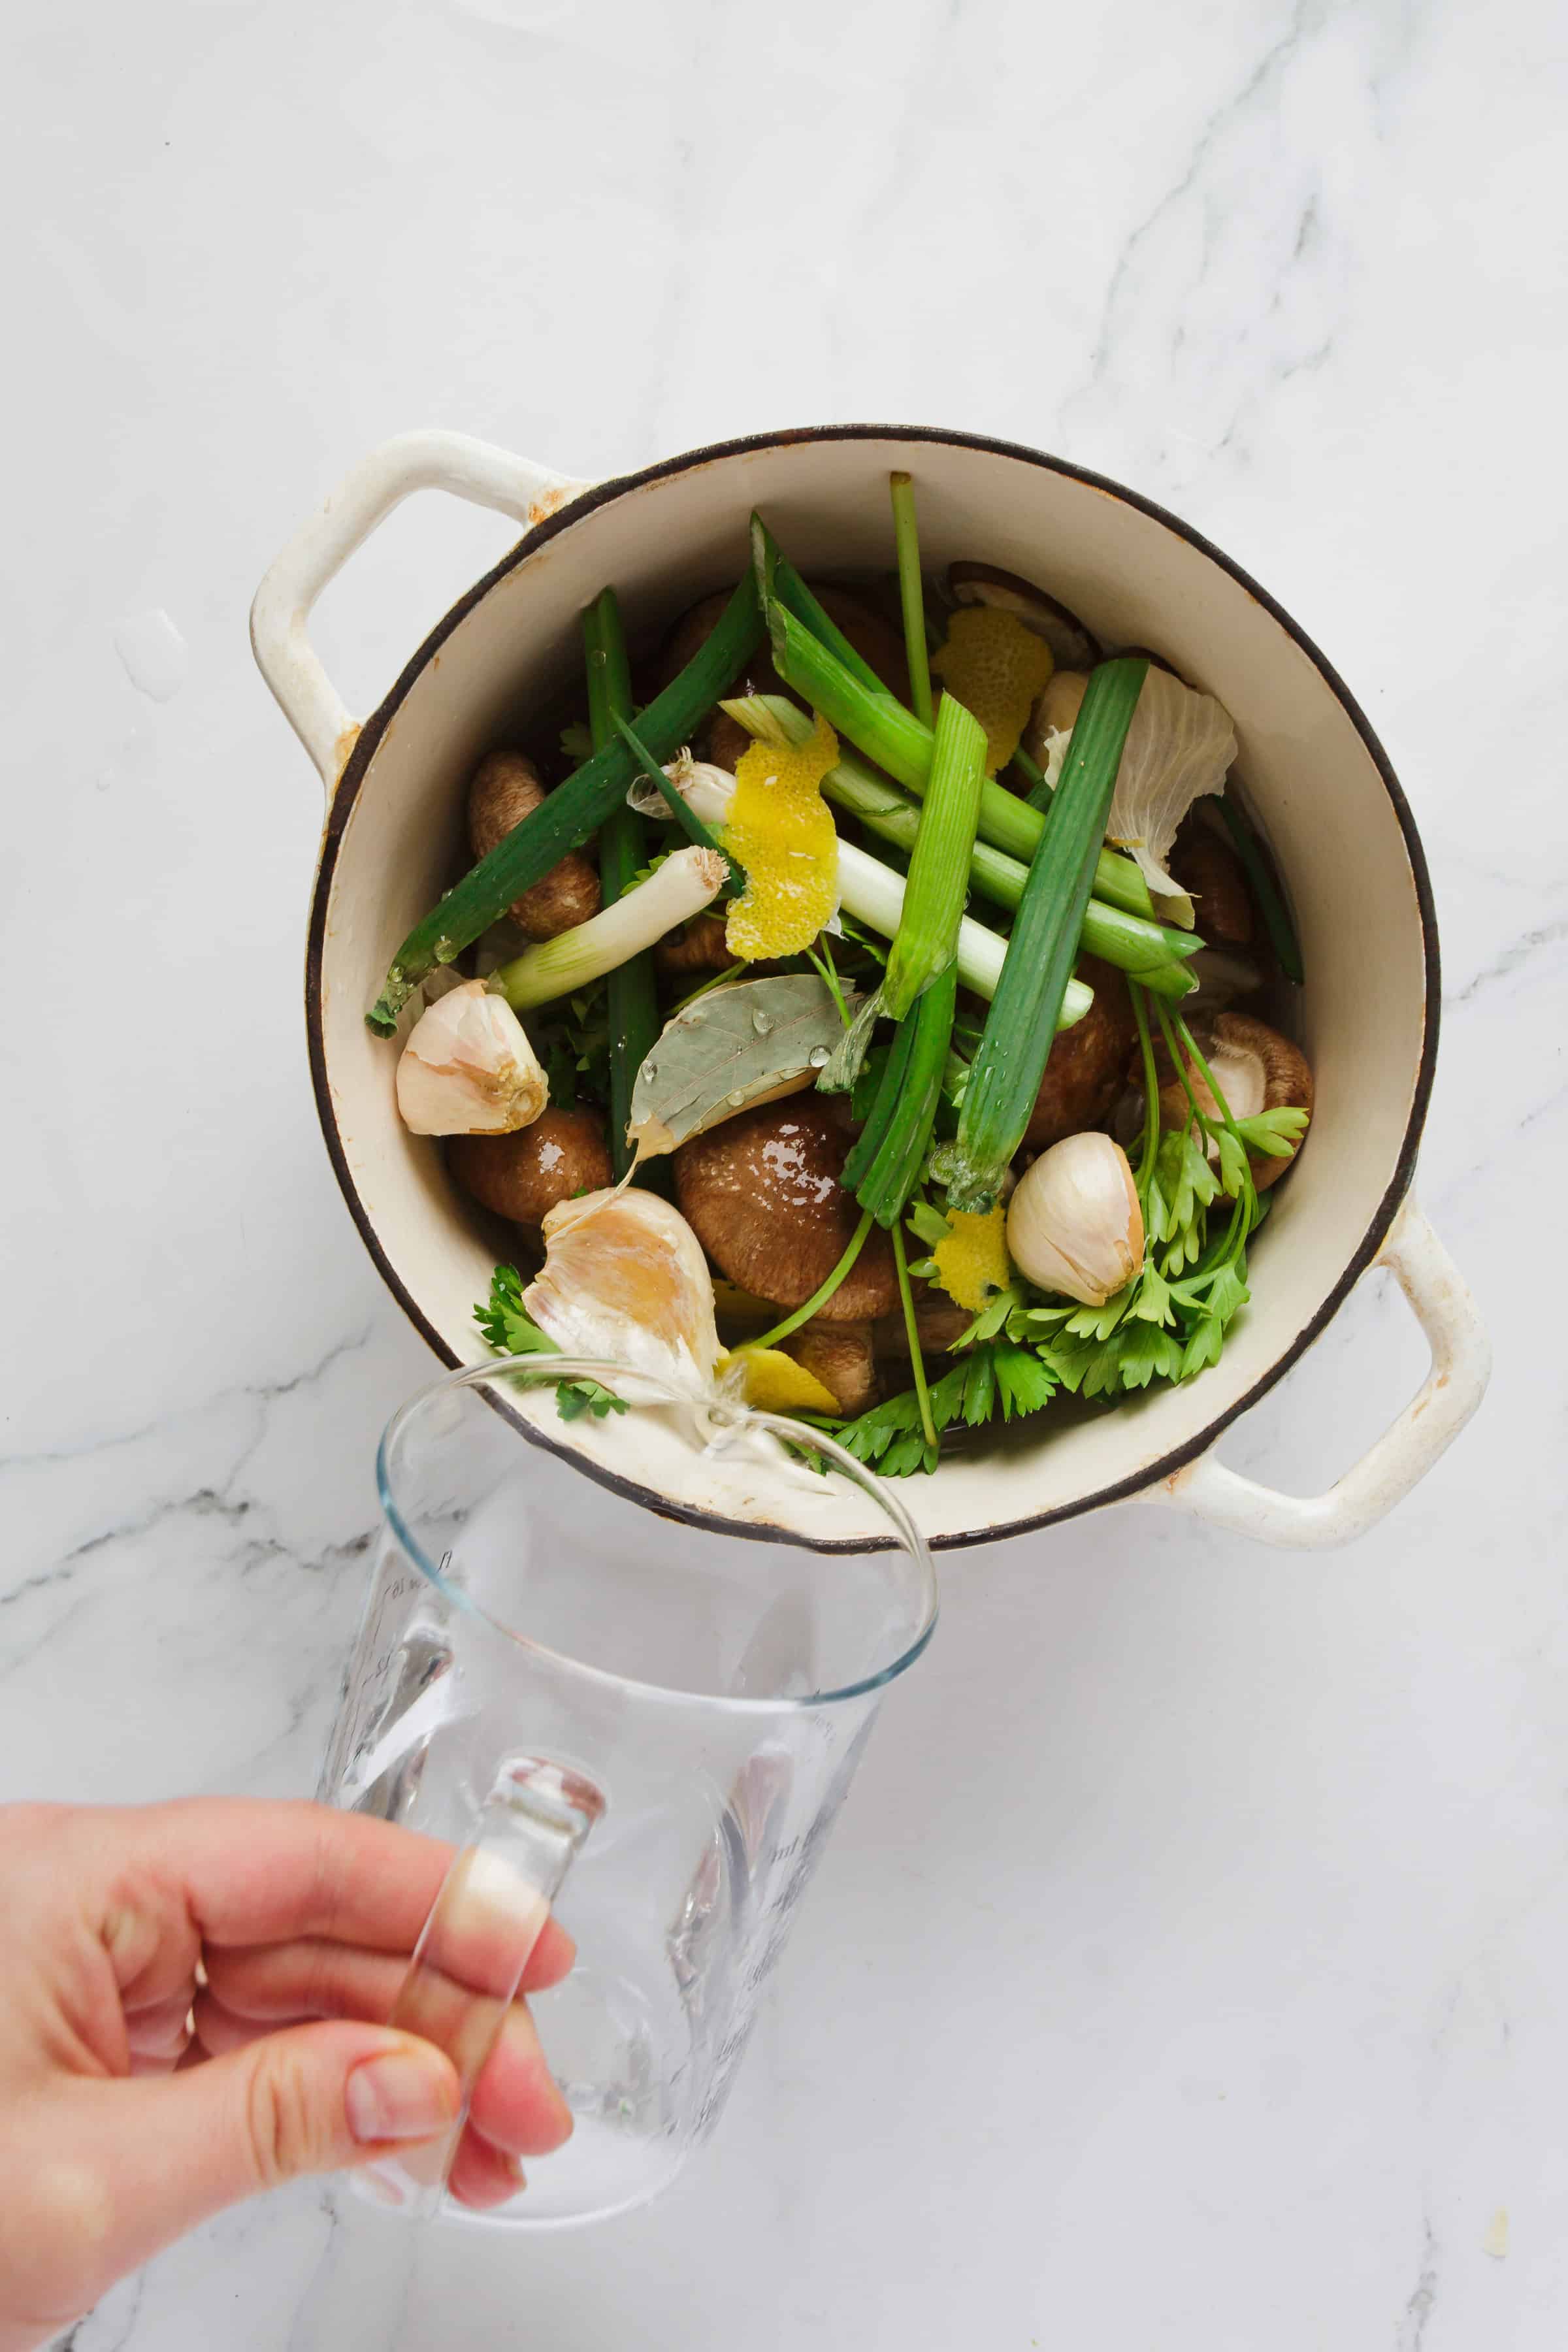 A white enameled pot filled with fresh vegetables, including green onions and garlic, on a marble surface.